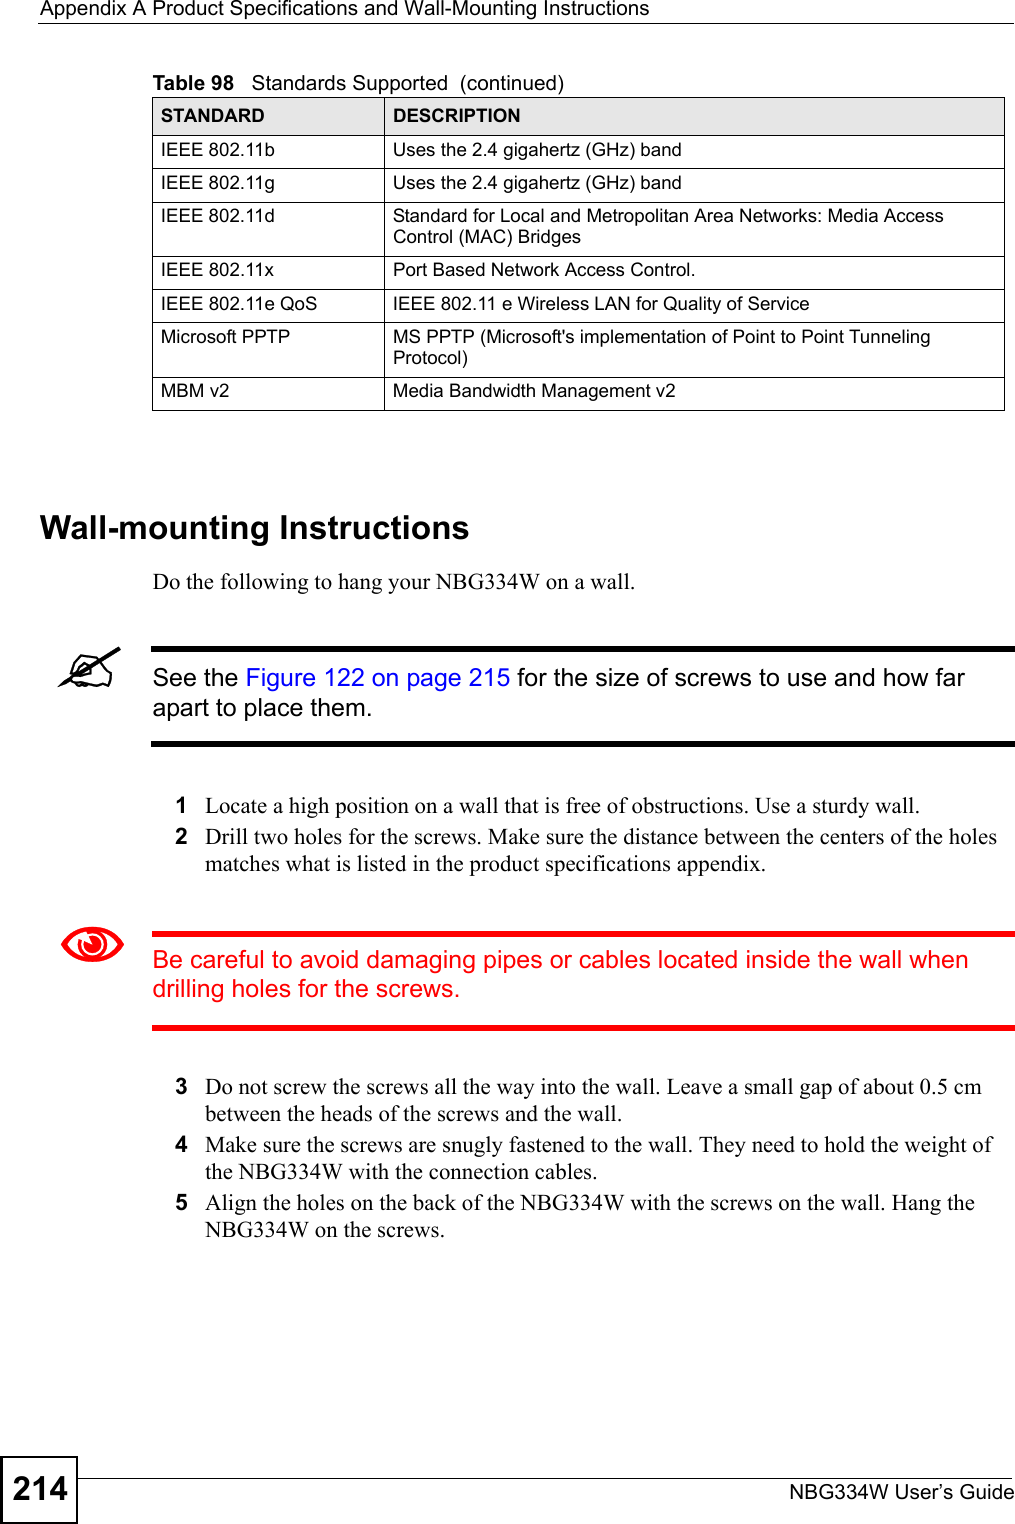 Appendix A Product Specifications and Wall-Mounting InstructionsNBG334W User’s Guide214Wall-mounting InstructionsDo the following to hang your NBG334W on a wall.&quot;See the Figure 122 on page 215 for the size of screws to use and how far apart to place them.1Locate a high position on a wall that is free of obstructions. Use a sturdy wall.2Drill two holes for the screws. Make sure the distance between the centers of the holes matches what is listed in the product specifications appendix.1Be careful to avoid damaging pipes or cables located inside the wall when drilling holes for the screws.3Do not screw the screws all the way into the wall. Leave a small gap of about 0.5 cm between the heads of the screws and the wall. 4Make sure the screws are snugly fastened to the wall. They need to hold the weight of the NBG334W with the connection cables. 5Align the holes on the back of the NBG334W with the screws on the wall. Hang the NBG334W on the screws.IEEE 802.11b Uses the 2.4 gigahertz (GHz) bandIEEE 802.11g Uses the 2.4 gigahertz (GHz) bandIEEE 802.11d Standard for Local and Metropolitan Area Networks: Media Access Control (MAC) BridgesIEEE 802.11x Port Based Network Access Control.IEEE 802.11e QoS IEEE 802.11 e Wireless LAN for Quality of ServiceMicrosoft PPTP MS PPTP (Microsoft&apos;s implementation of Point to Point Tunneling Protocol)MBM v2 Media Bandwidth Management v2Table 98   Standards Supported  (continued)STANDARD DESCRIPTION